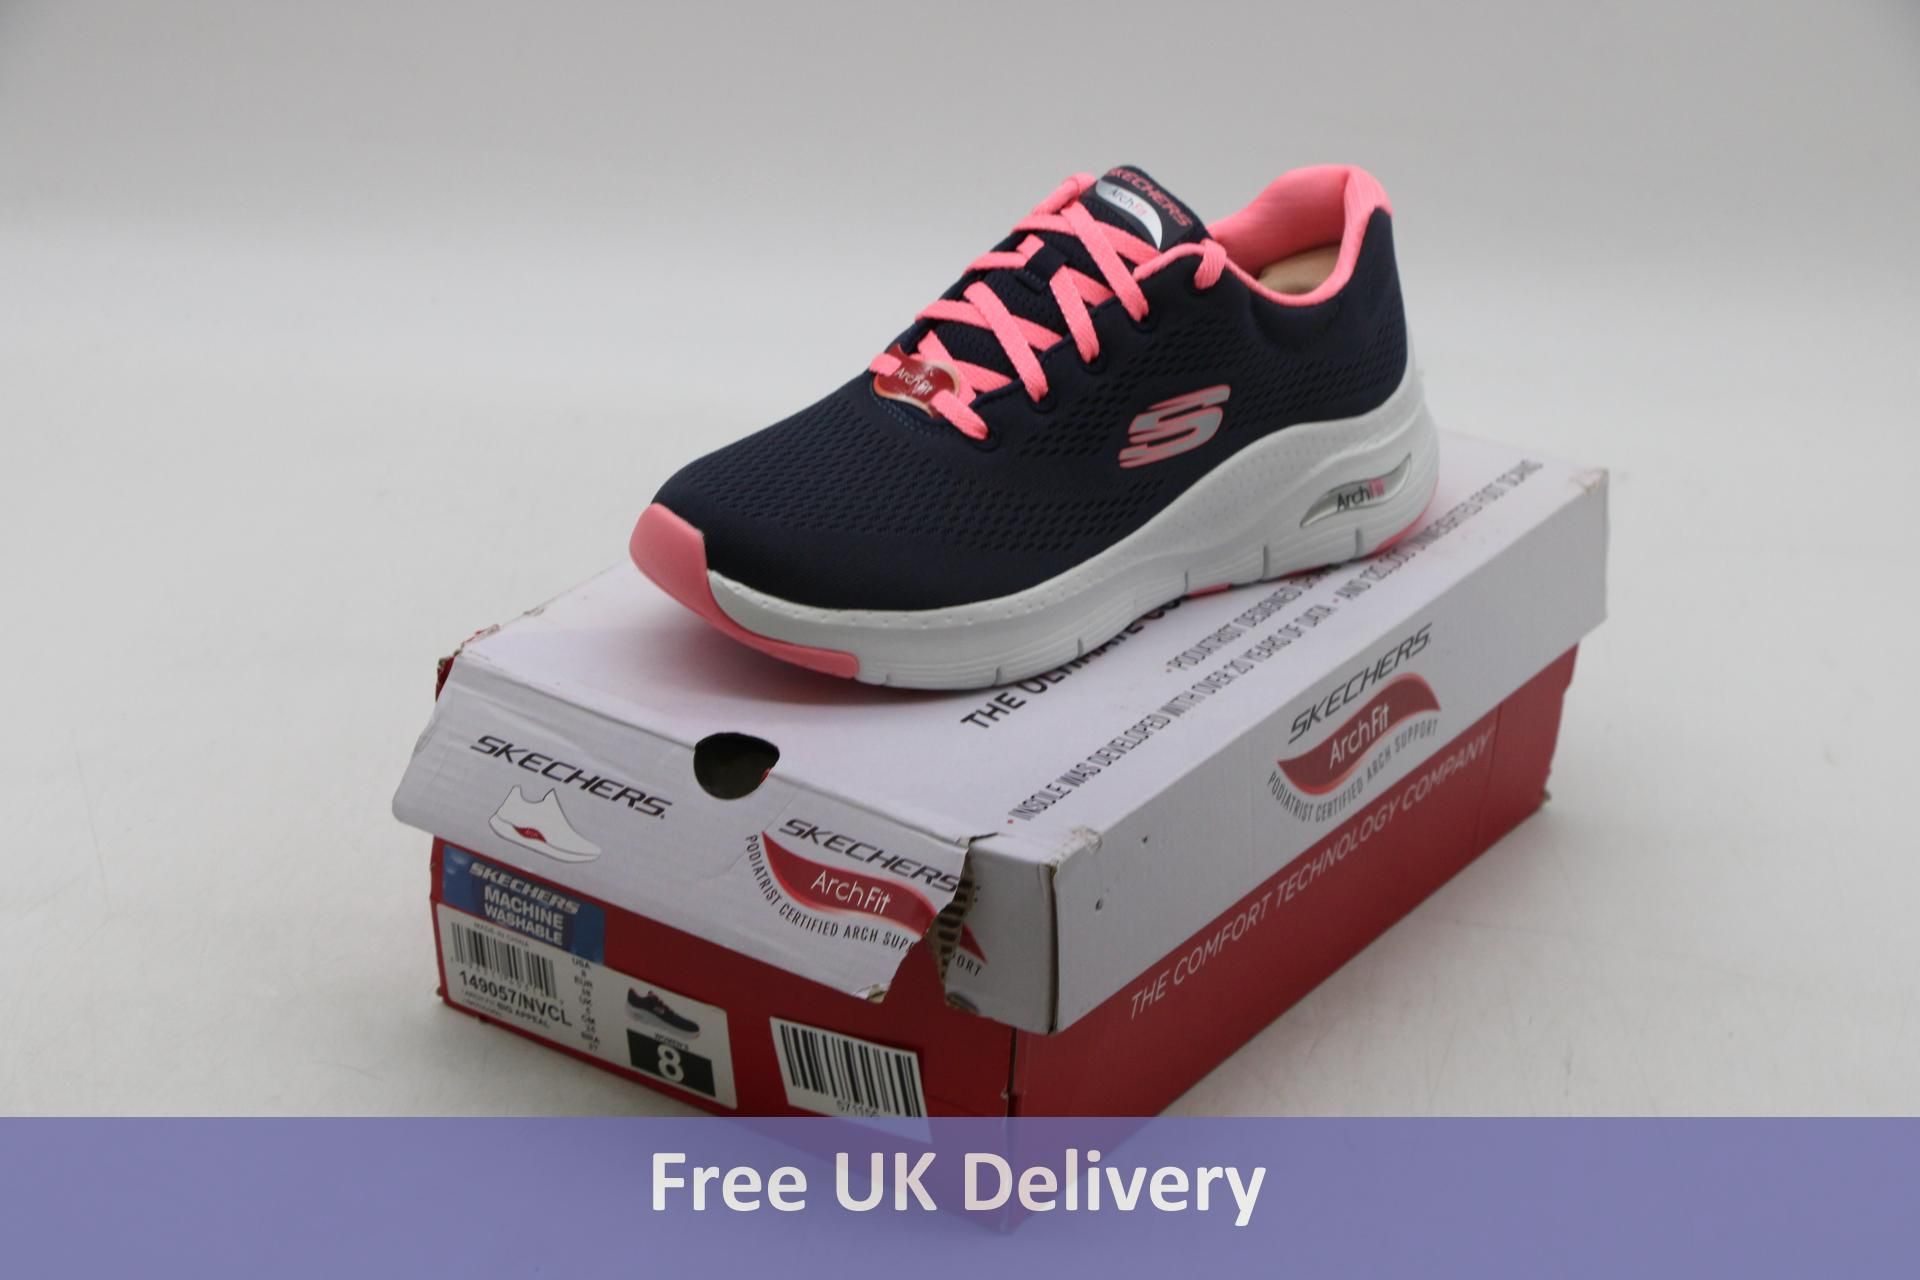 Sketchers Arch Fit Big Appeal Trainers, Black/Pink/White, UK 5. Box damaged